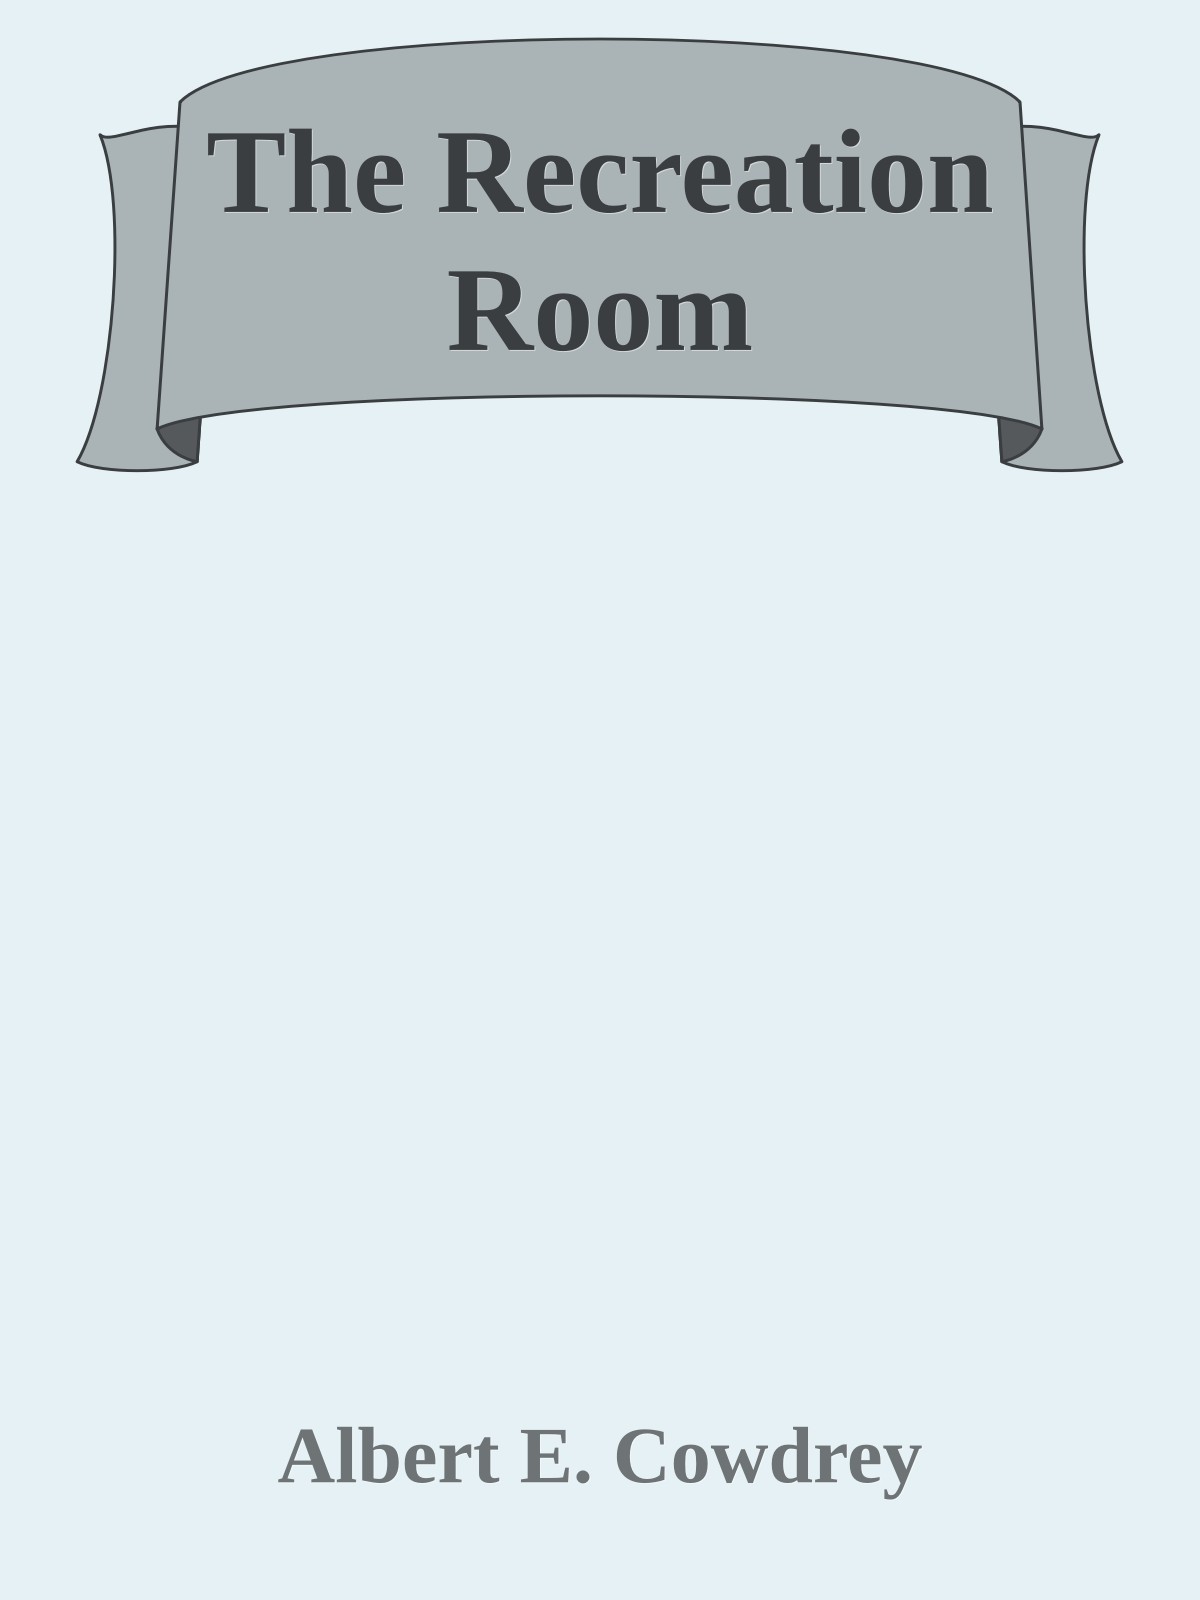 The Recreation Room